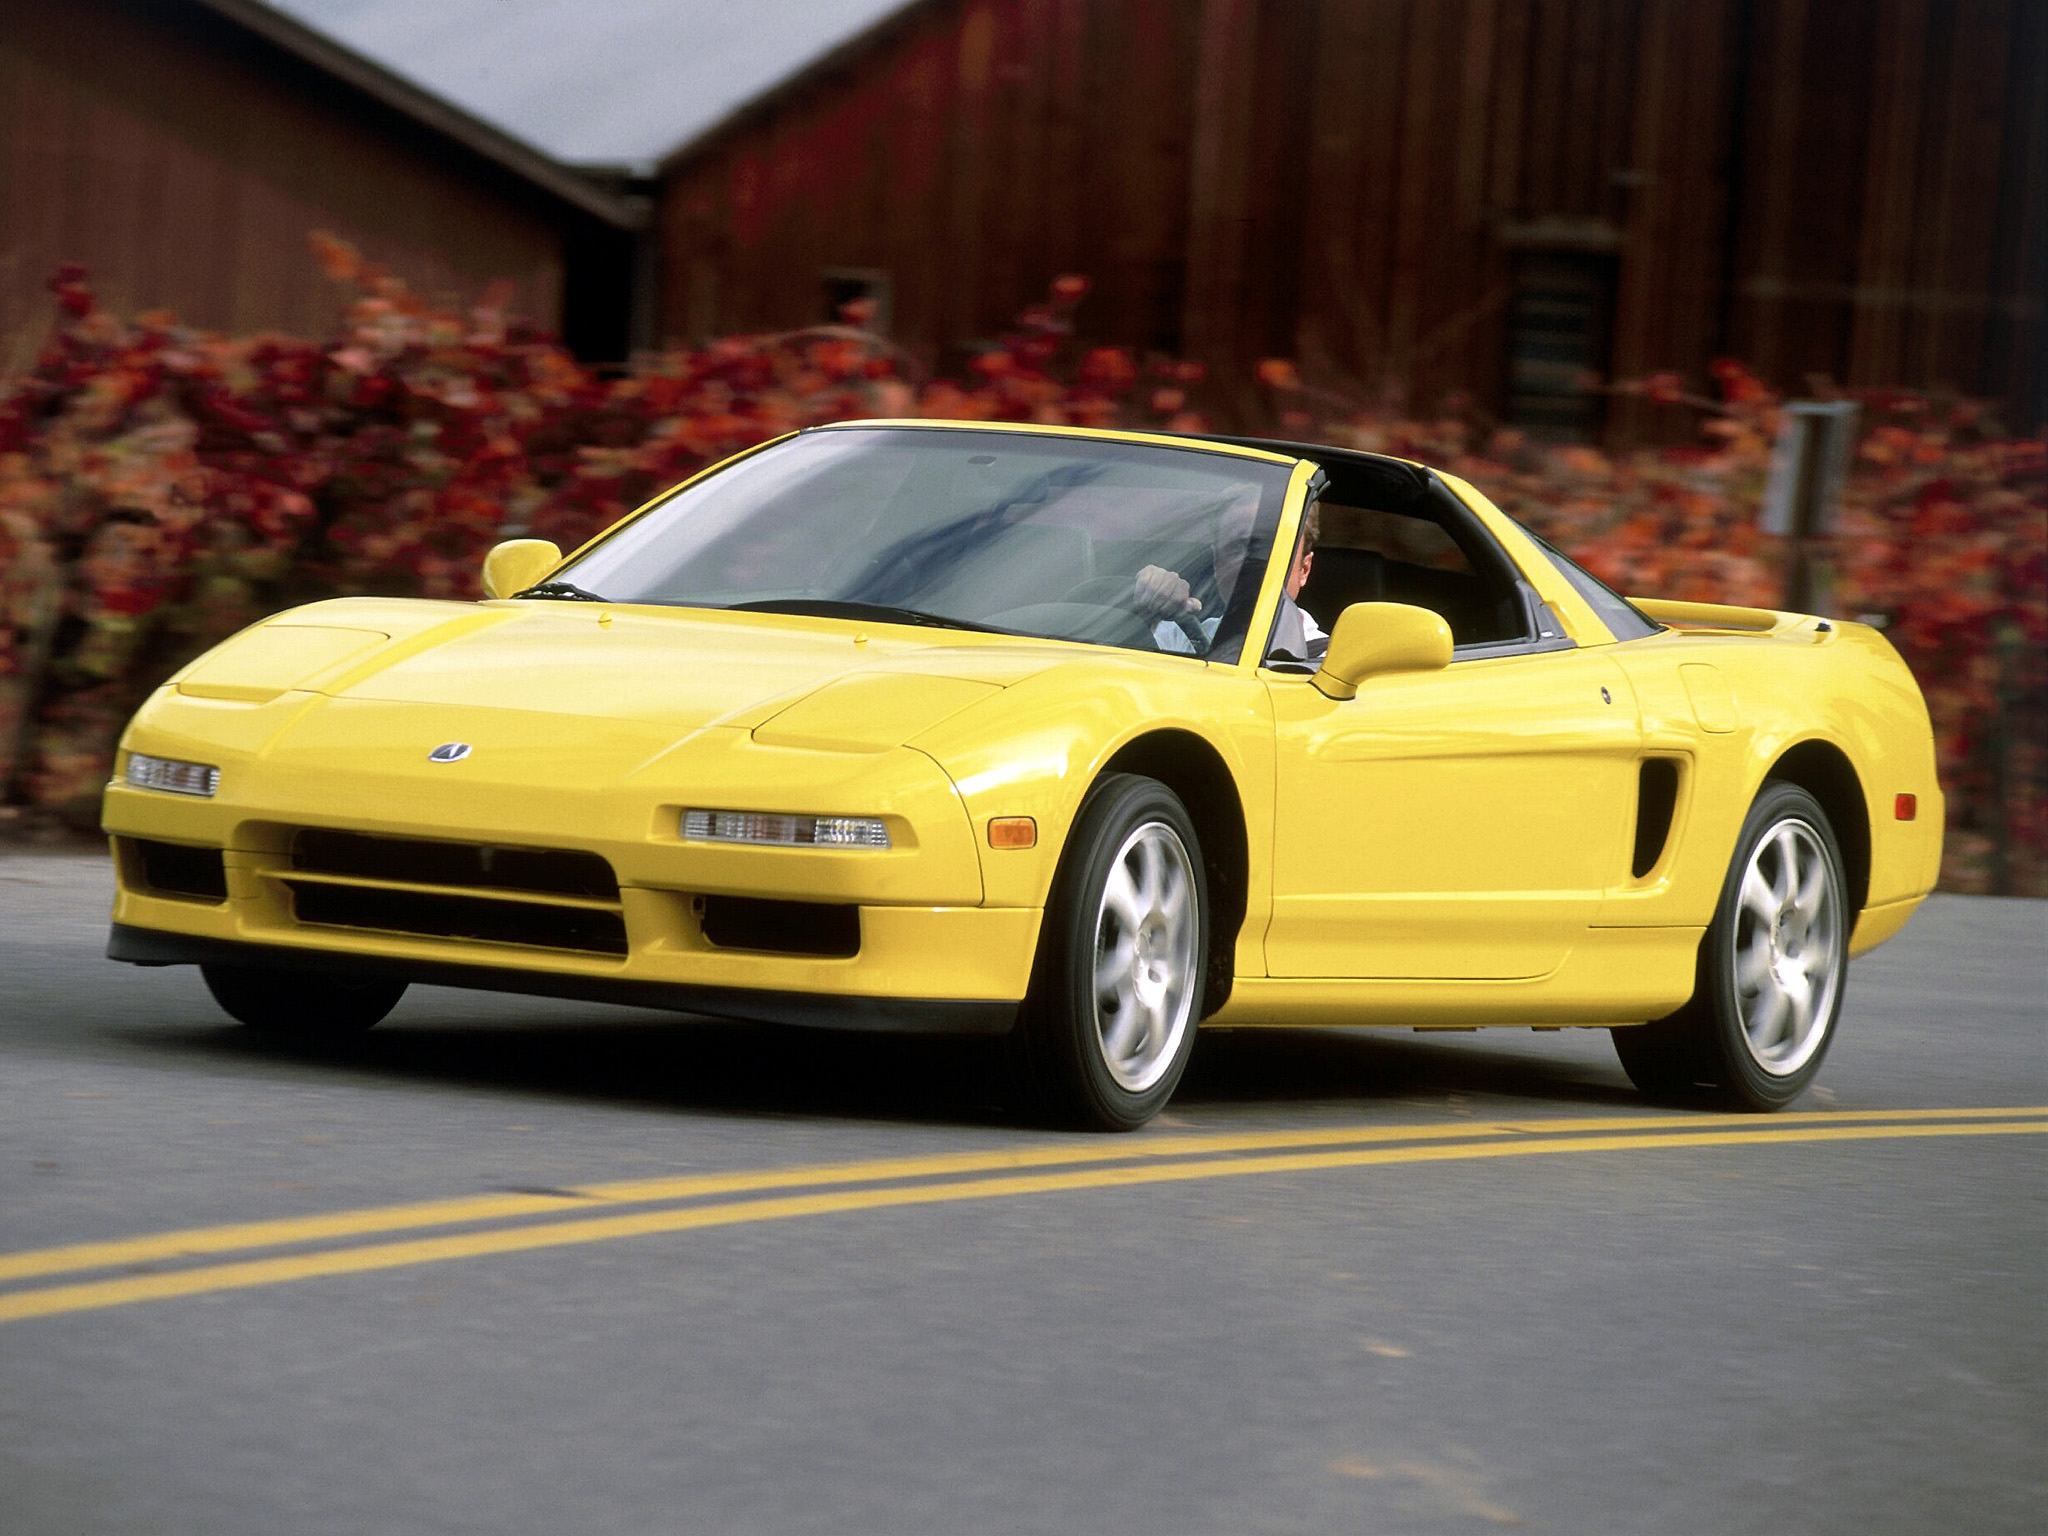 acura, sports, auto, cars, yellow, front view, speed, style, cabriolet, akura, nsx t, nskh t, nsh t